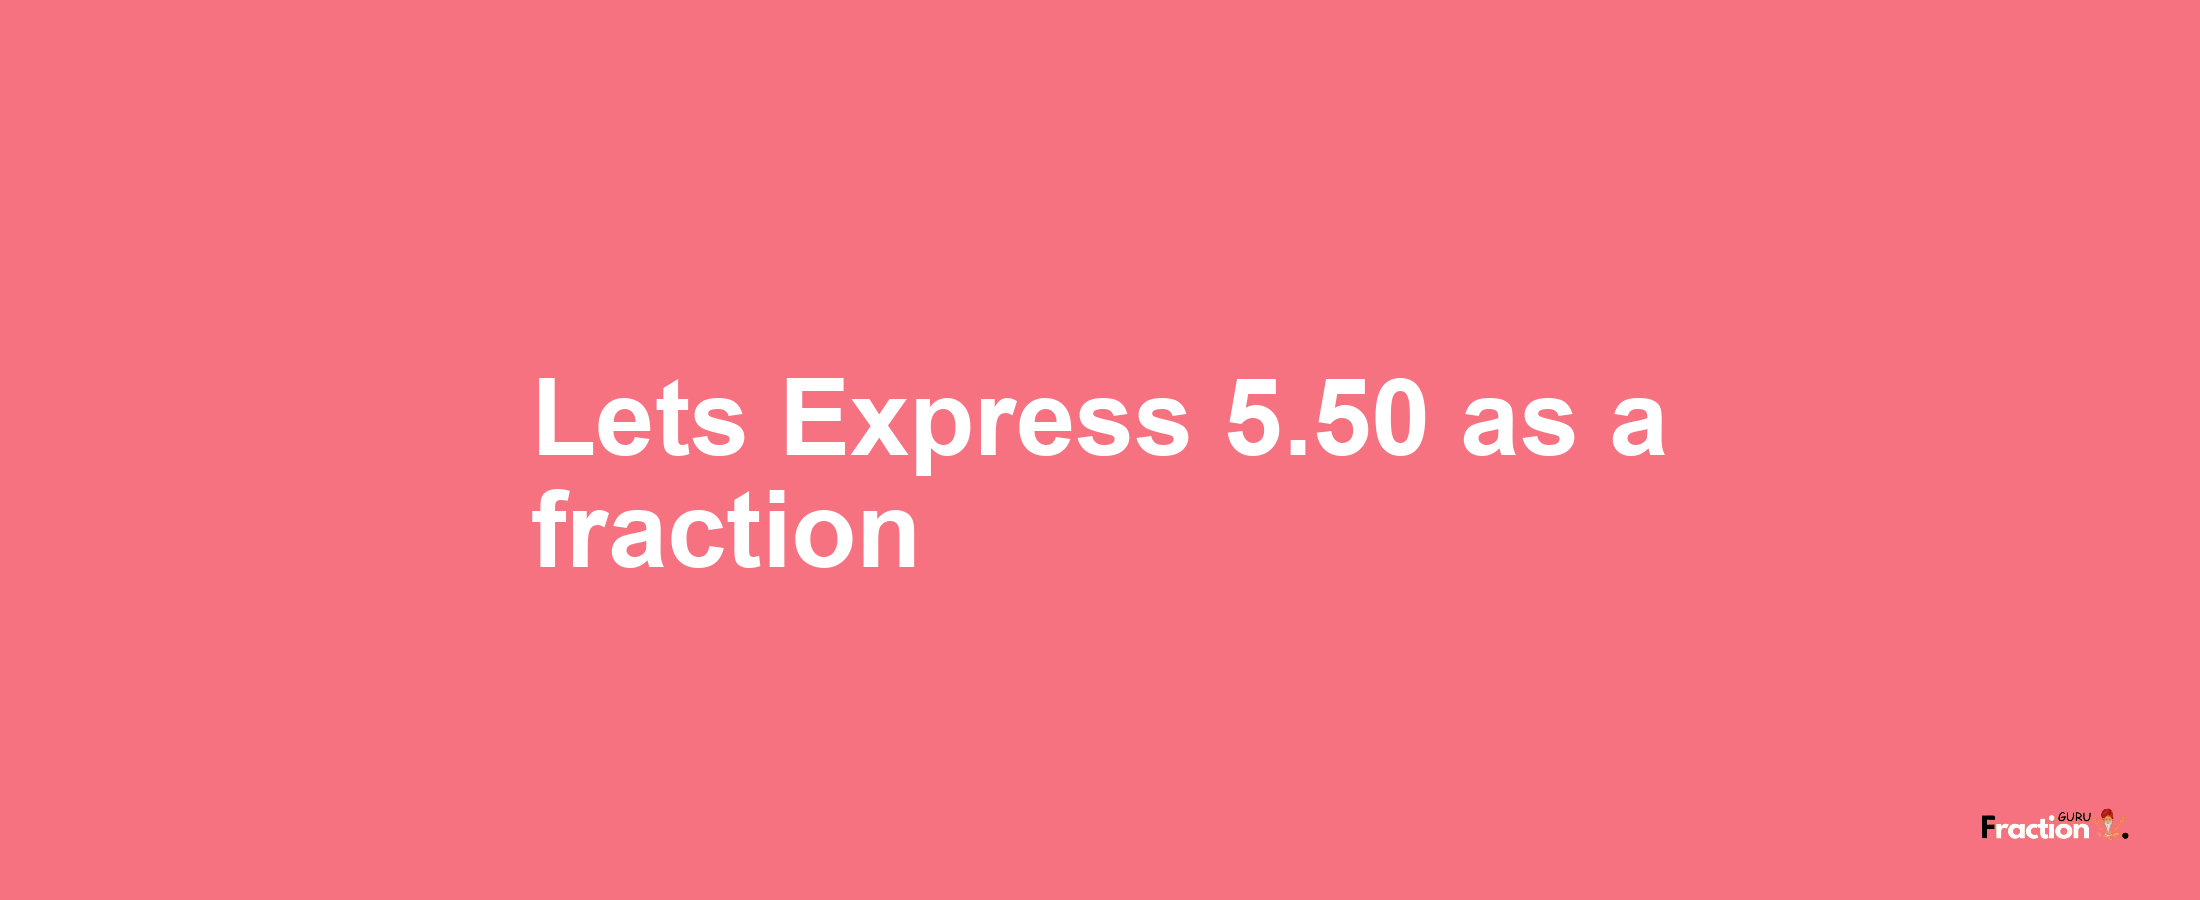 Lets Express 5.50 as afraction